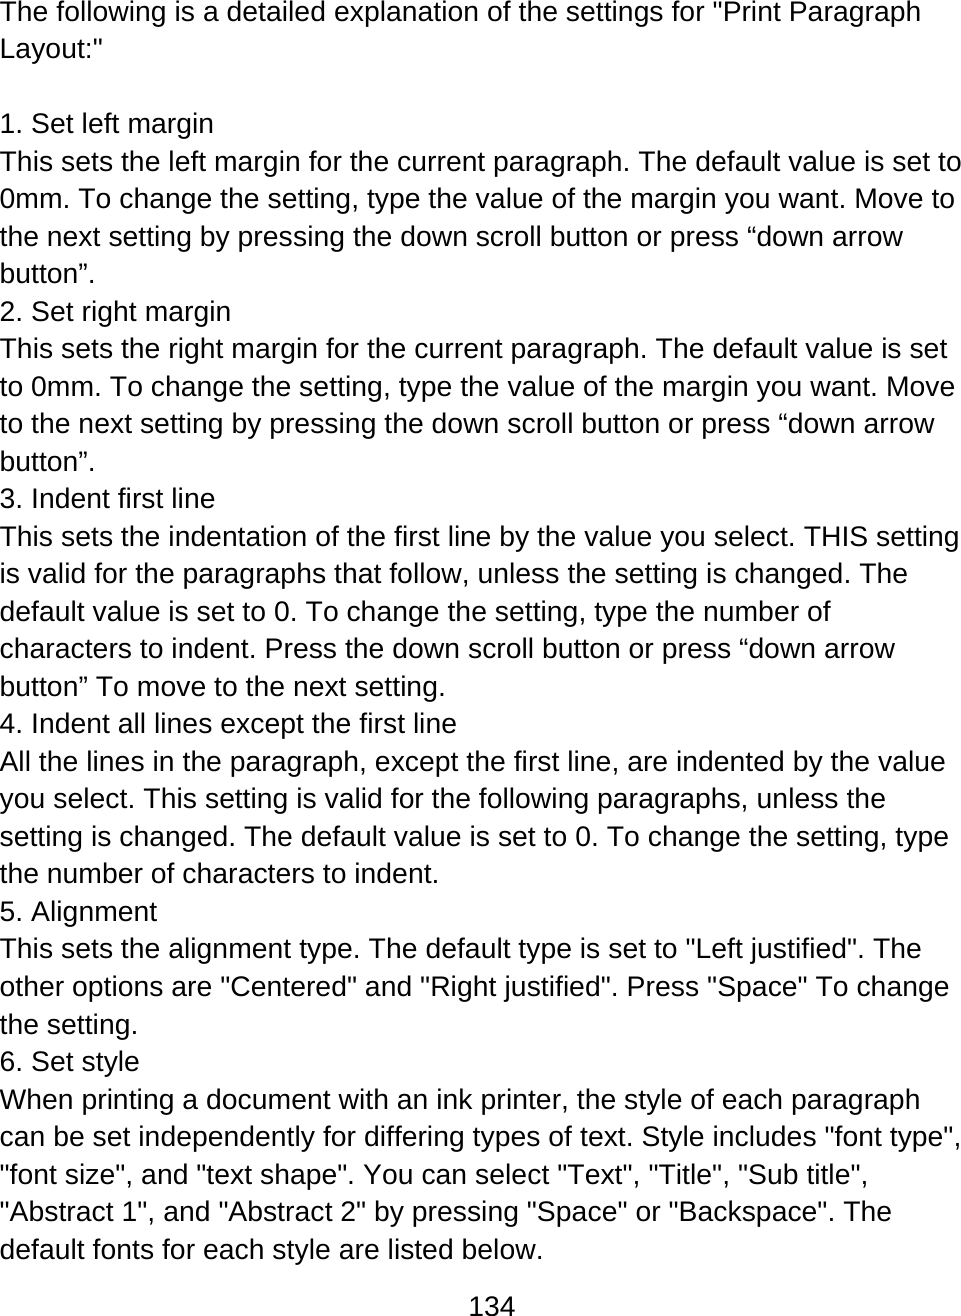 134  The following is a detailed explanation of the settings for &quot;Print Paragraph Layout:&quot;  1. Set left margin This sets the left margin for the current paragraph. The default value is set to 0mm. To change the setting, type the value of the margin you want. Move to the next setting by pressing the down scroll button or press “down arrow button”. 2. Set right margin This sets the right margin for the current paragraph. The default value is set to 0mm. To change the setting, type the value of the margin you want. Move to the next setting by pressing the down scroll button or press “down arrow button”. 3. Indent first line This sets the indentation of the first line by the value you select. THIS setting is valid for the paragraphs that follow, unless the setting is changed. The default value is set to 0. To change the setting, type the number of characters to indent. Press the down scroll button or press “down arrow button” To move to the next setting. 4. Indent all lines except the first line All the lines in the paragraph, except the first line, are indented by the value you select. This setting is valid for the following paragraphs, unless the setting is changed. The default value is set to 0. To change the setting, type the number of characters to indent. 5. Alignment This sets the alignment type. The default type is set to &quot;Left justified&quot;. The other options are &quot;Centered&quot; and &quot;Right justified&quot;. Press &quot;Space&quot; To change the setting. 6. Set style When printing a document with an ink printer, the style of each paragraph can be set independently for differing types of text. Style includes &quot;font type&quot;, &quot;font size&quot;, and &quot;text shape&quot;. You can select &quot;Text&quot;, &quot;Title&quot;, &quot;Sub title&quot;, &quot;Abstract 1&quot;, and &quot;Abstract 2&quot; by pressing &quot;Space&quot; or &quot;Backspace&quot;. The default fonts for each style are listed below. 